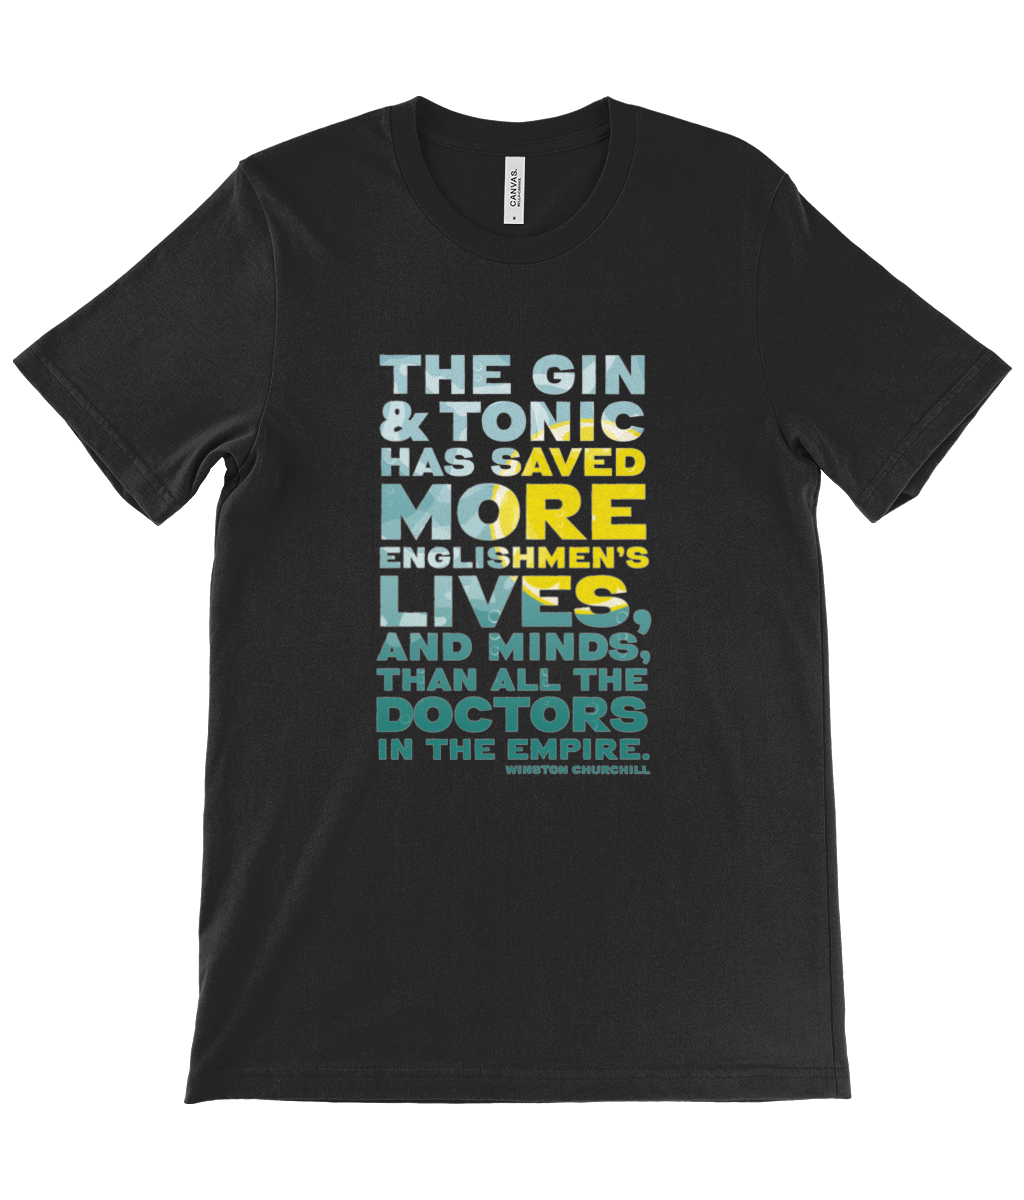 Unisex Crew Neck T-Shirt - “The gin and tonic has saved more Englishmen's lives, and minds, than all the doctors in the Empire" - Winston Churchill.